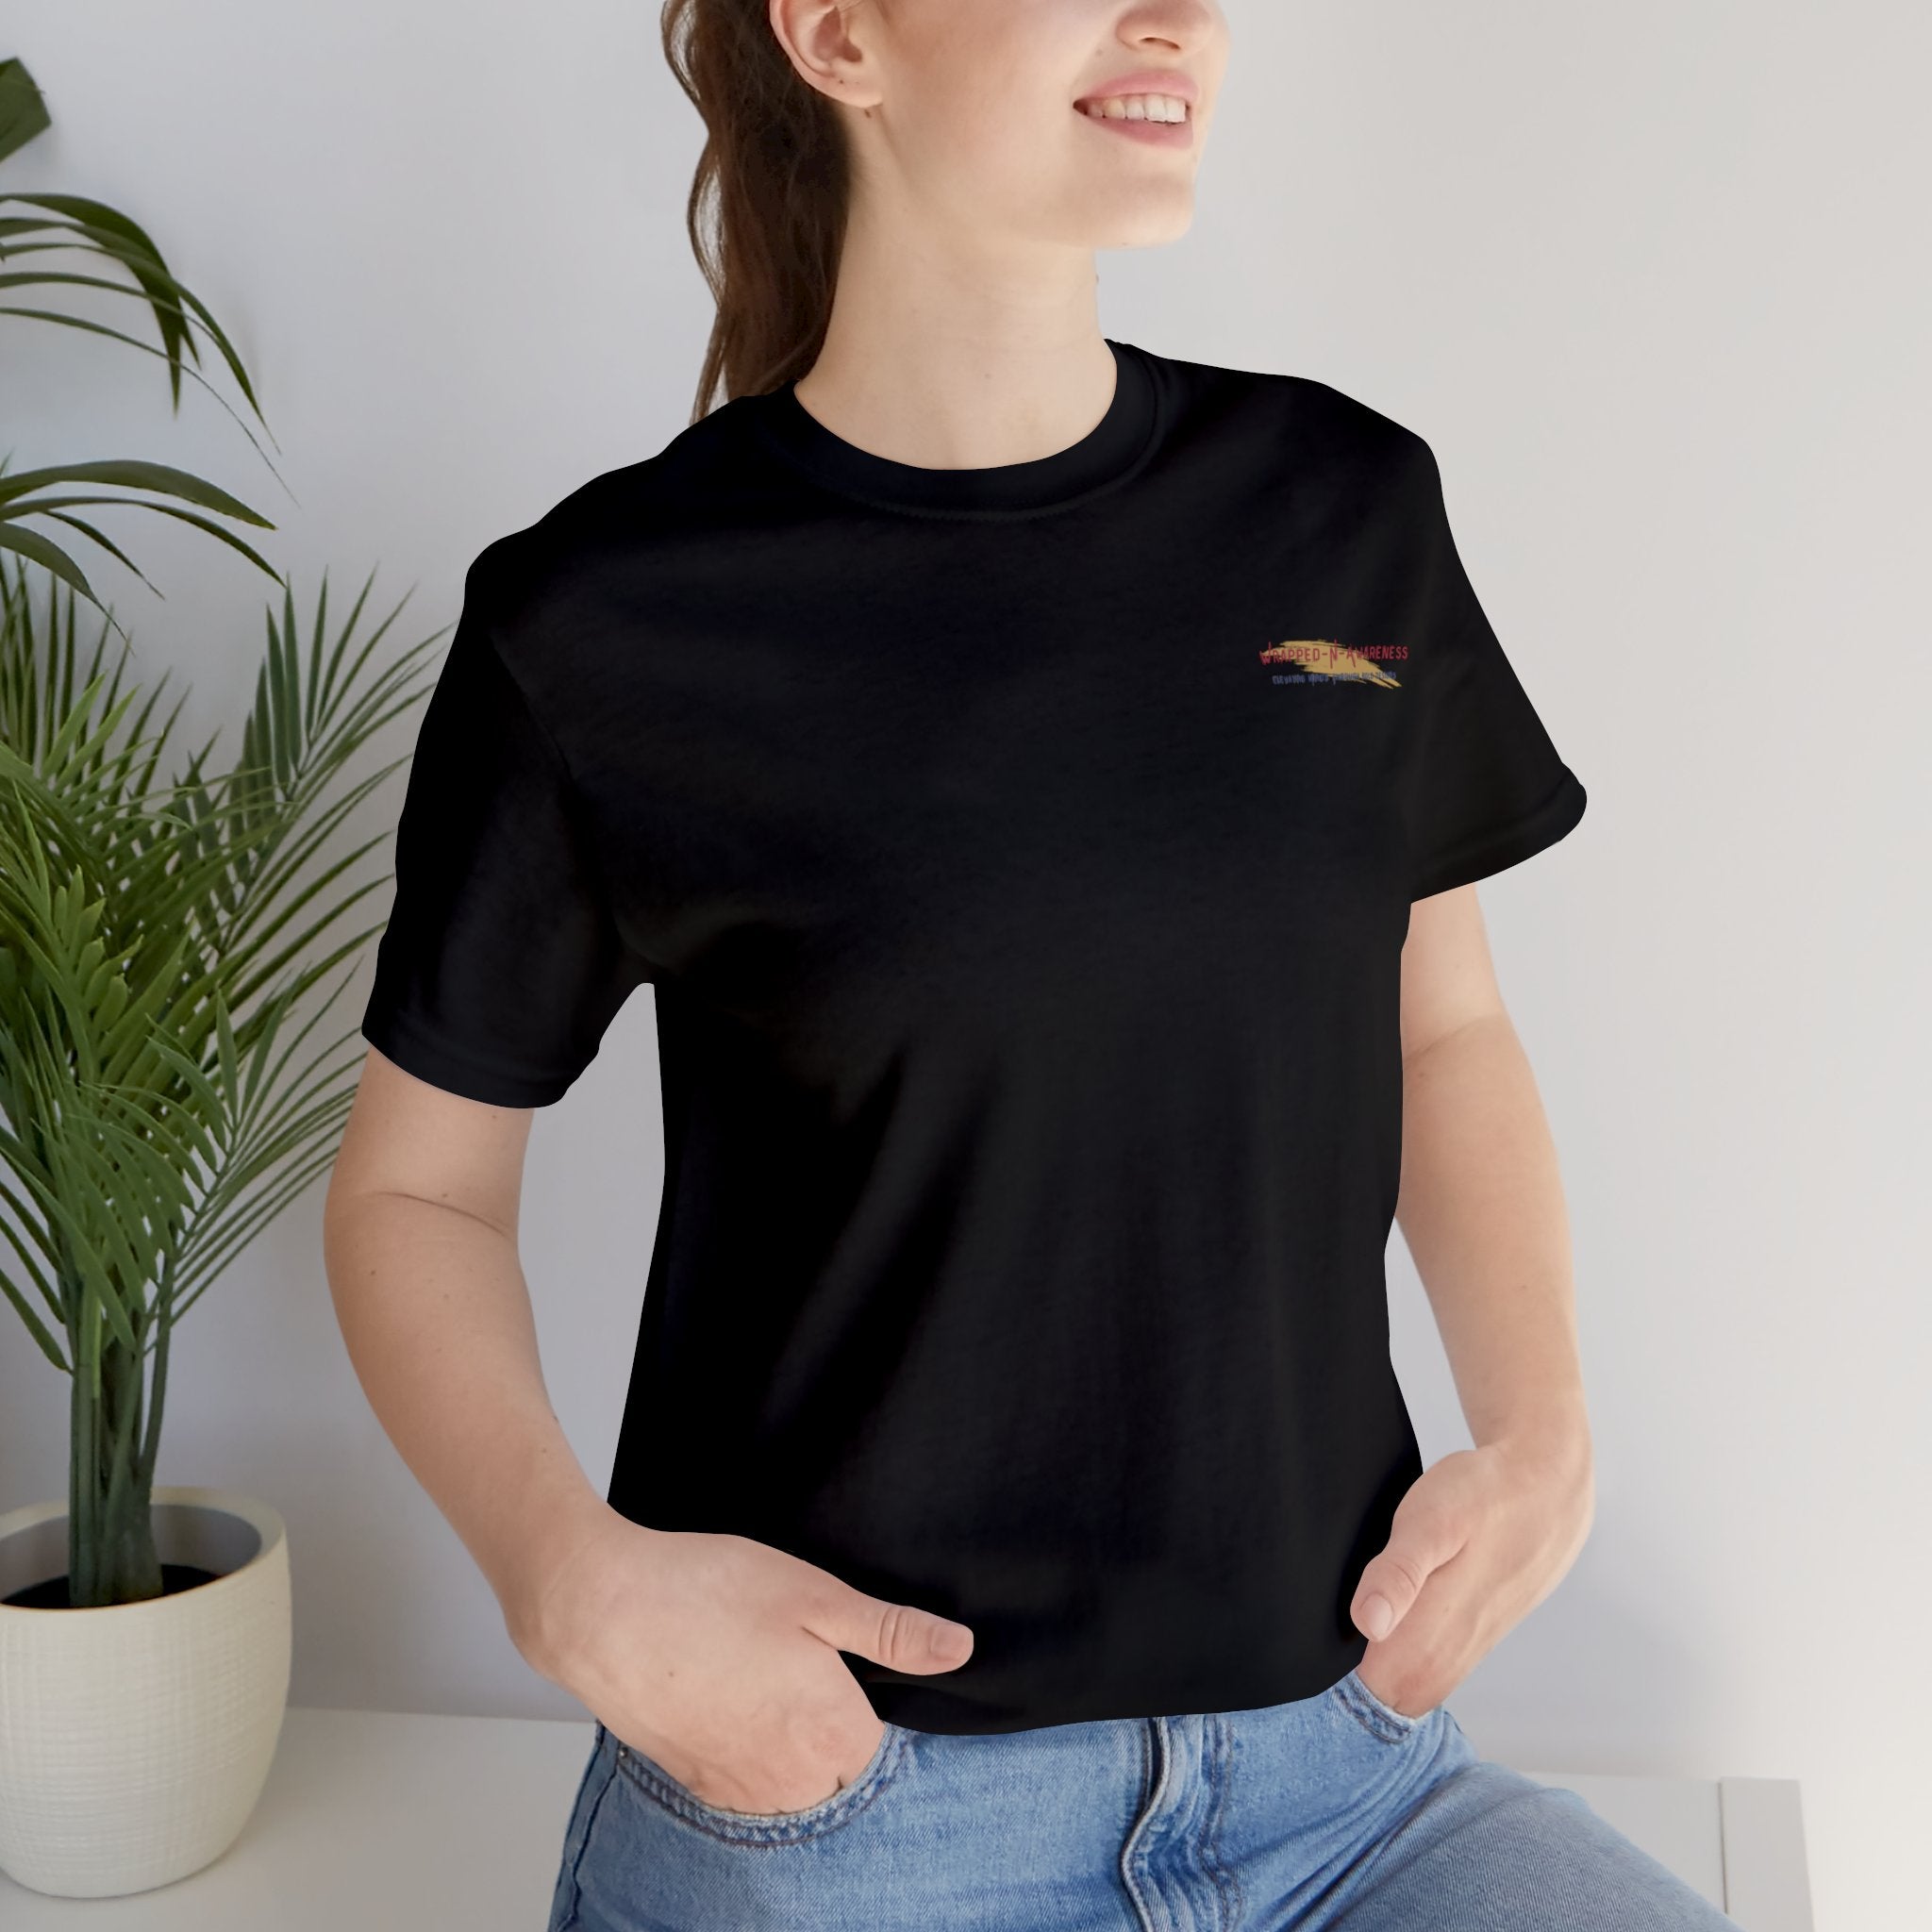 Progress Over Perfection Tee - Bella+Canvas 3001 Yellow Airlume Cotton Bella+Canvas 3001 Crew Neckline Jersey Short Sleeve Lightweight Fabric Mental Health Support Retail Fit Tear-away Label Tee Unisex Tee T-Shirt 16938651220655687482_2048 Printify